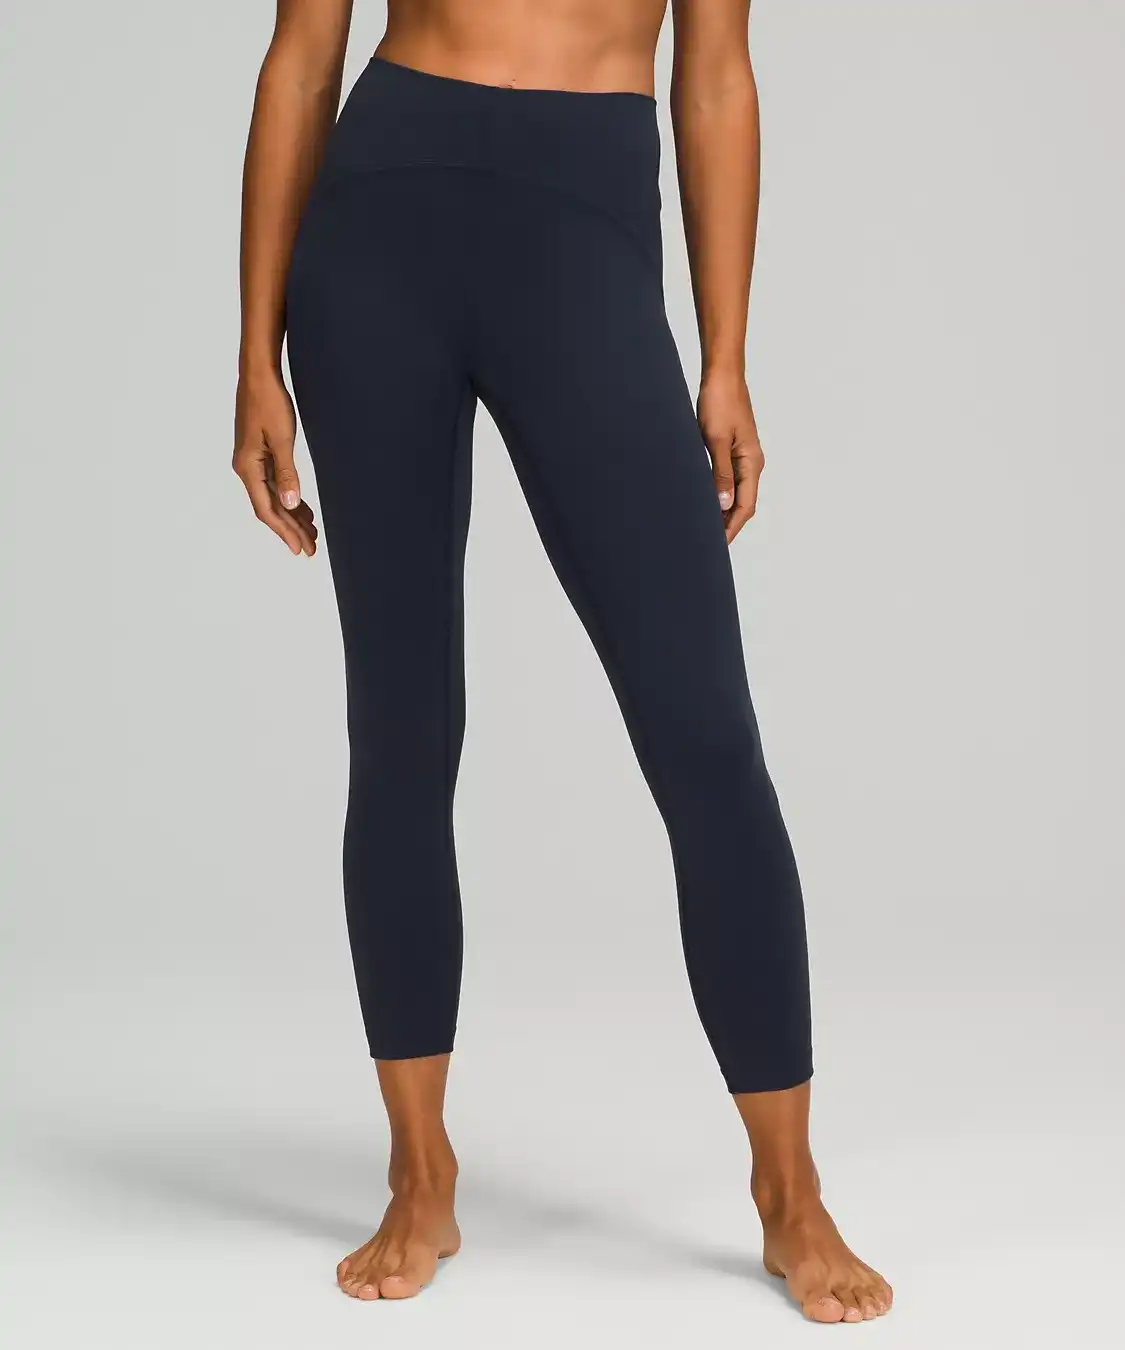 Best Lululemon Pants For Dance Classes  International Society of Precision  Agriculture